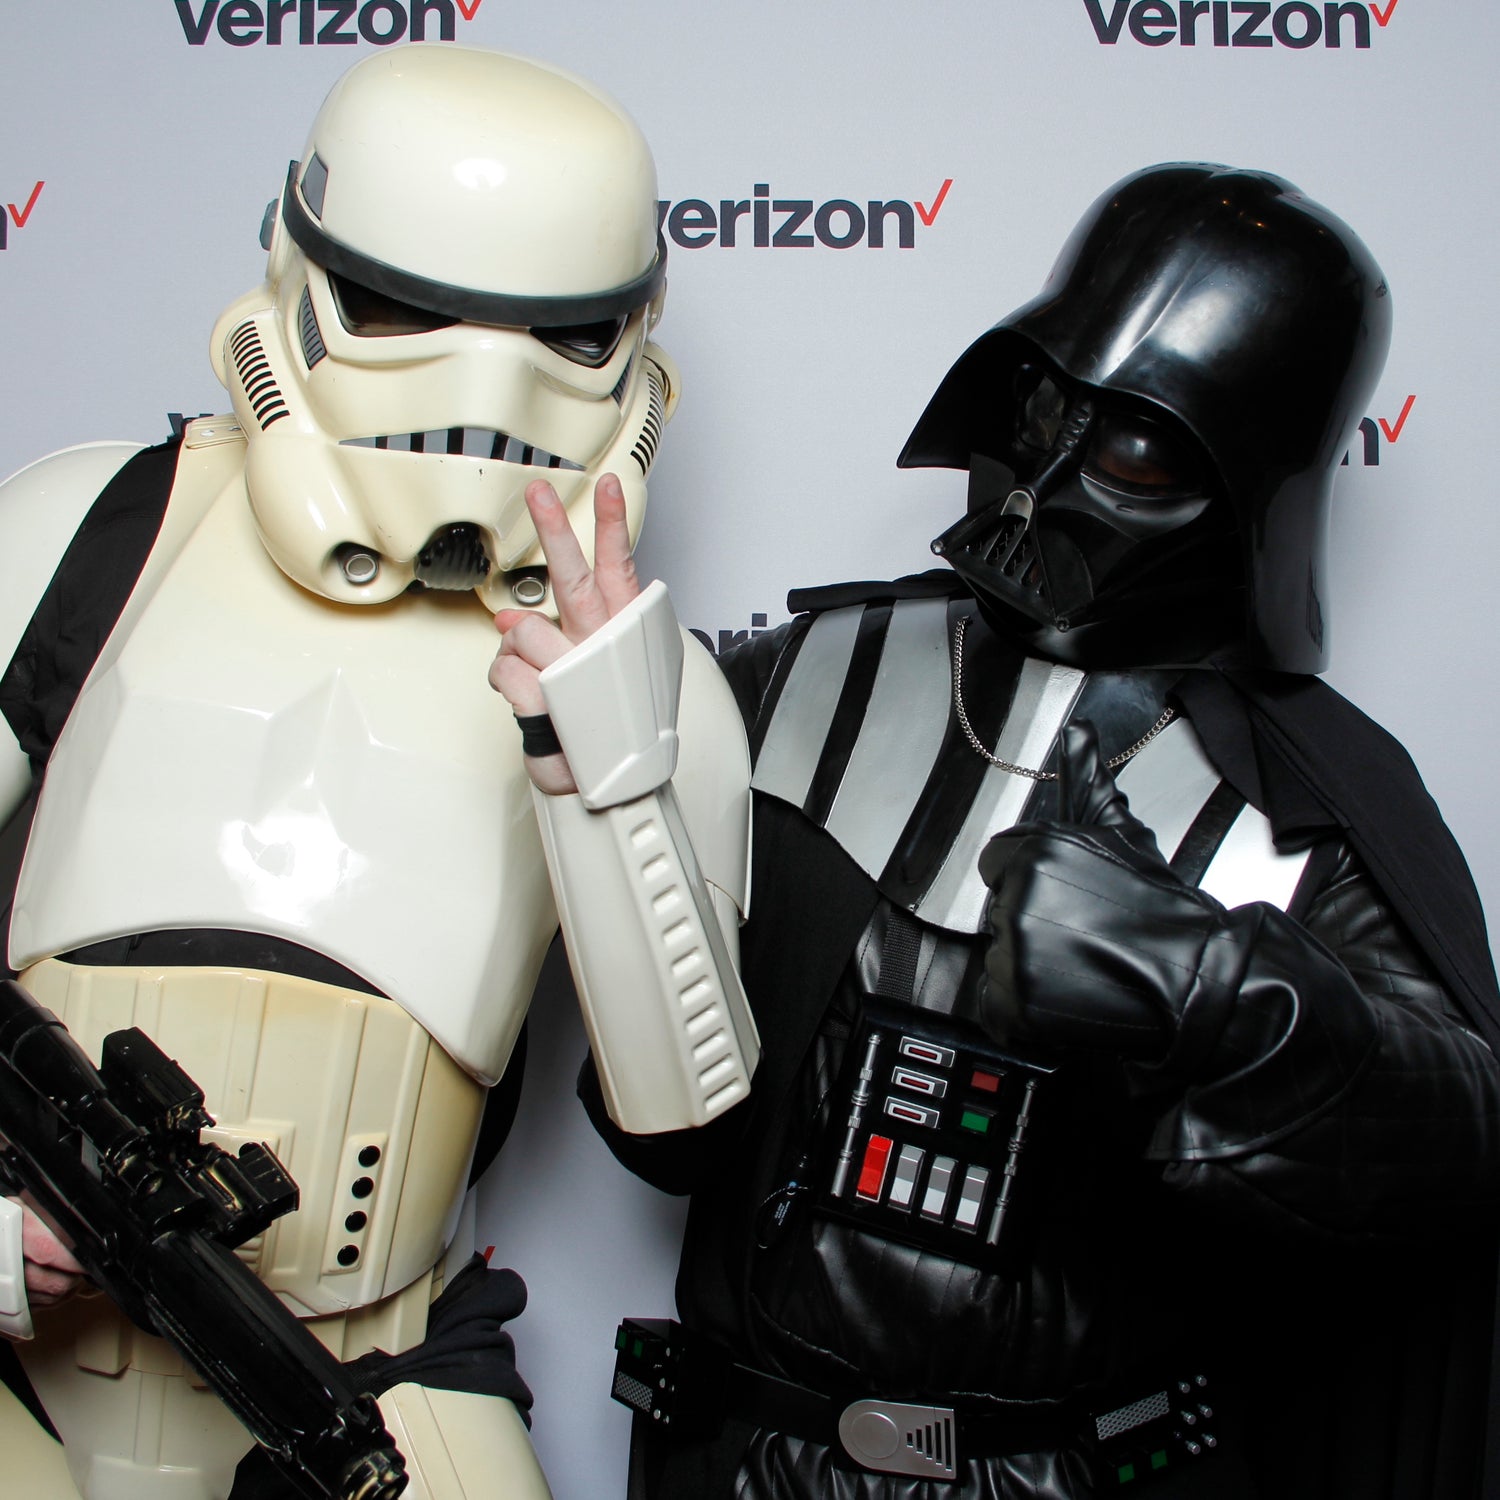 Darth Vader and a Storm Trooper posing in a Verizon Photo Booth at a Halloween Party